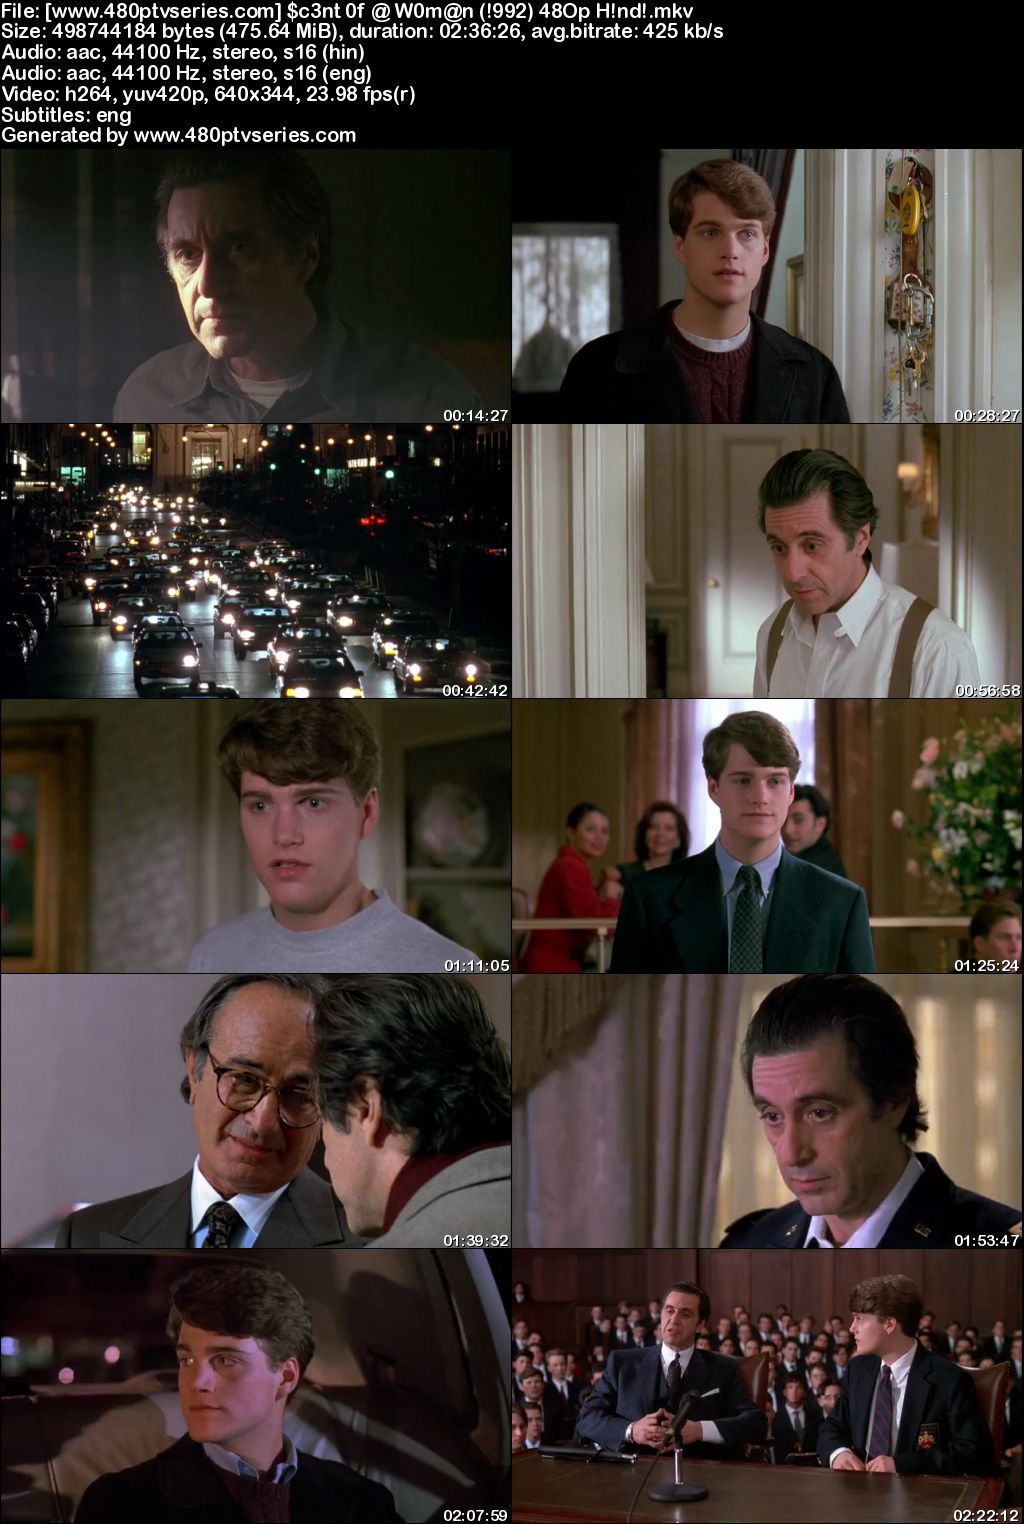 Scent of a Woman (1992) 450MB Full Hindi Dual Audio Movie Download 480p Bluray Free Watch Online Full Movie Download Worldfree4u 9xmovies